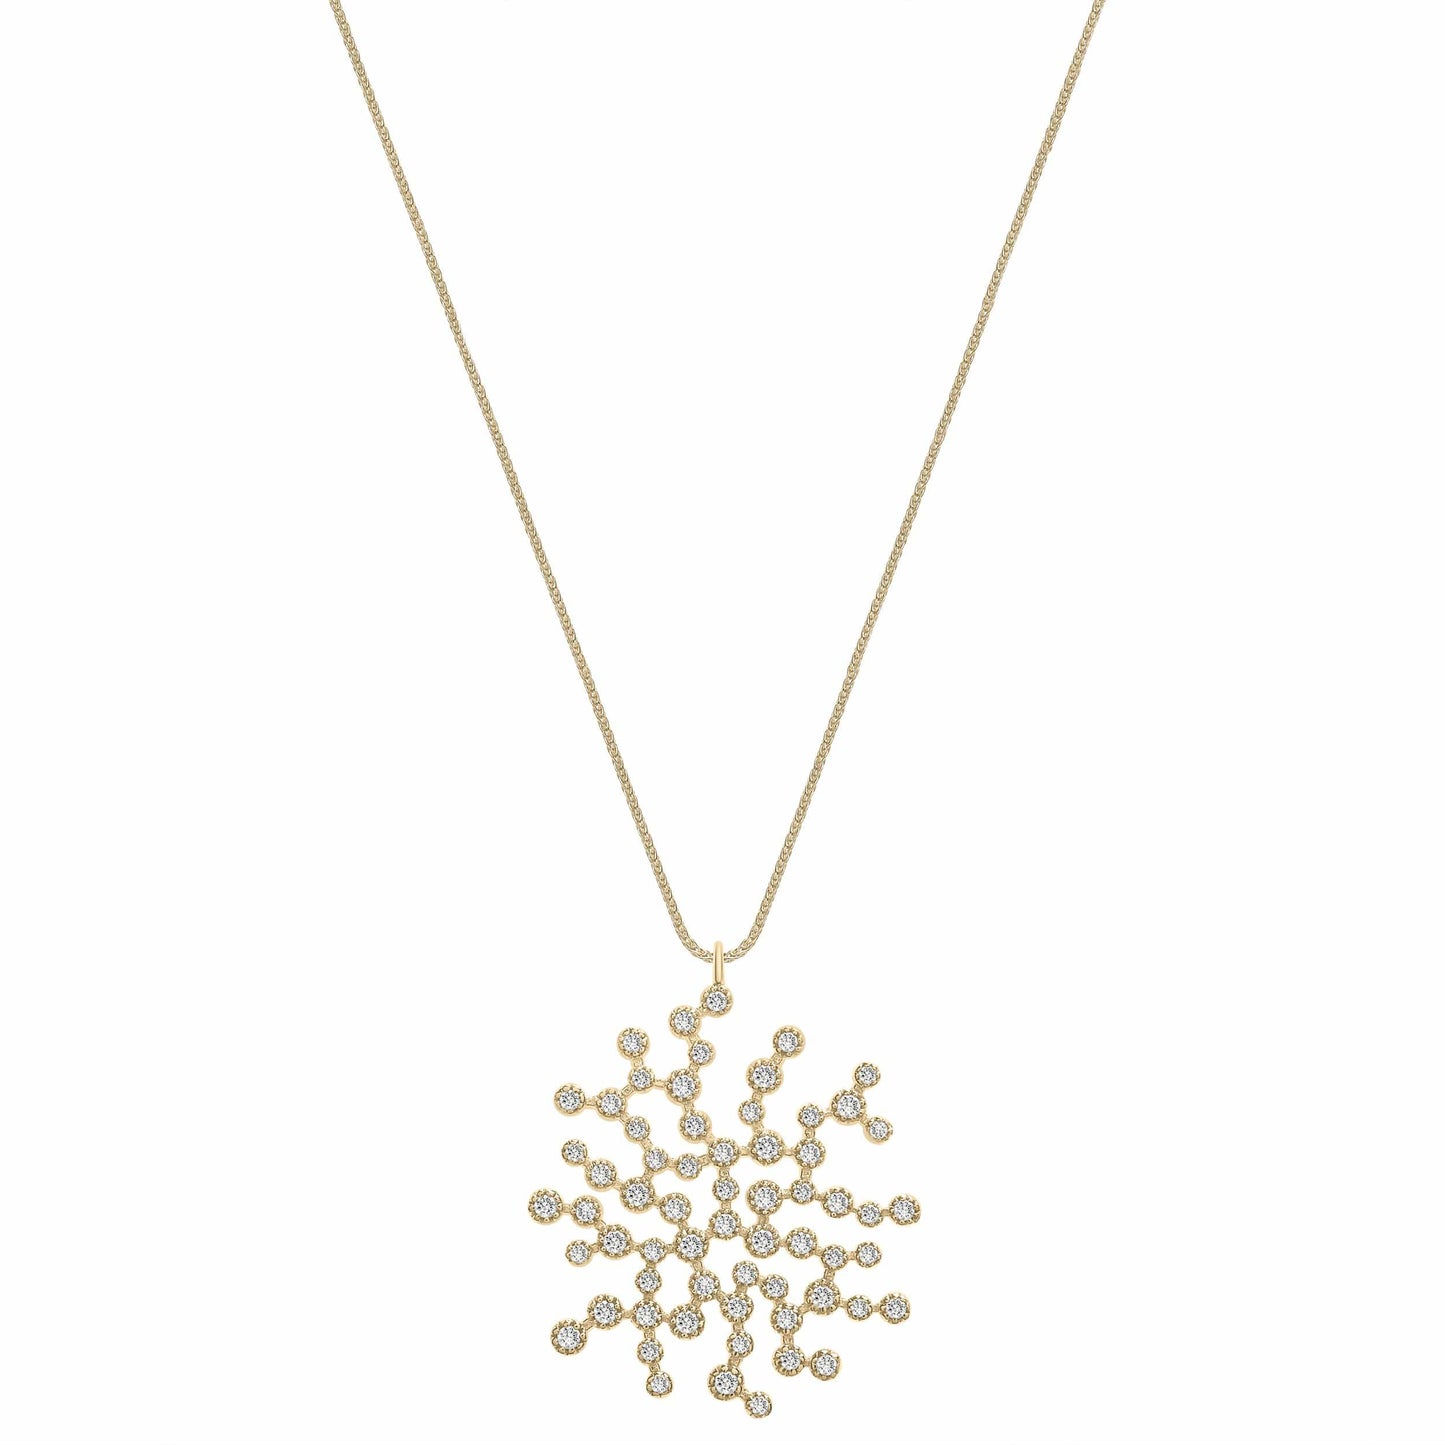 Dalia T Necklace Signature Collection 14KT Yellow Gold 1CT Diamond Starburst Pendant Necklace